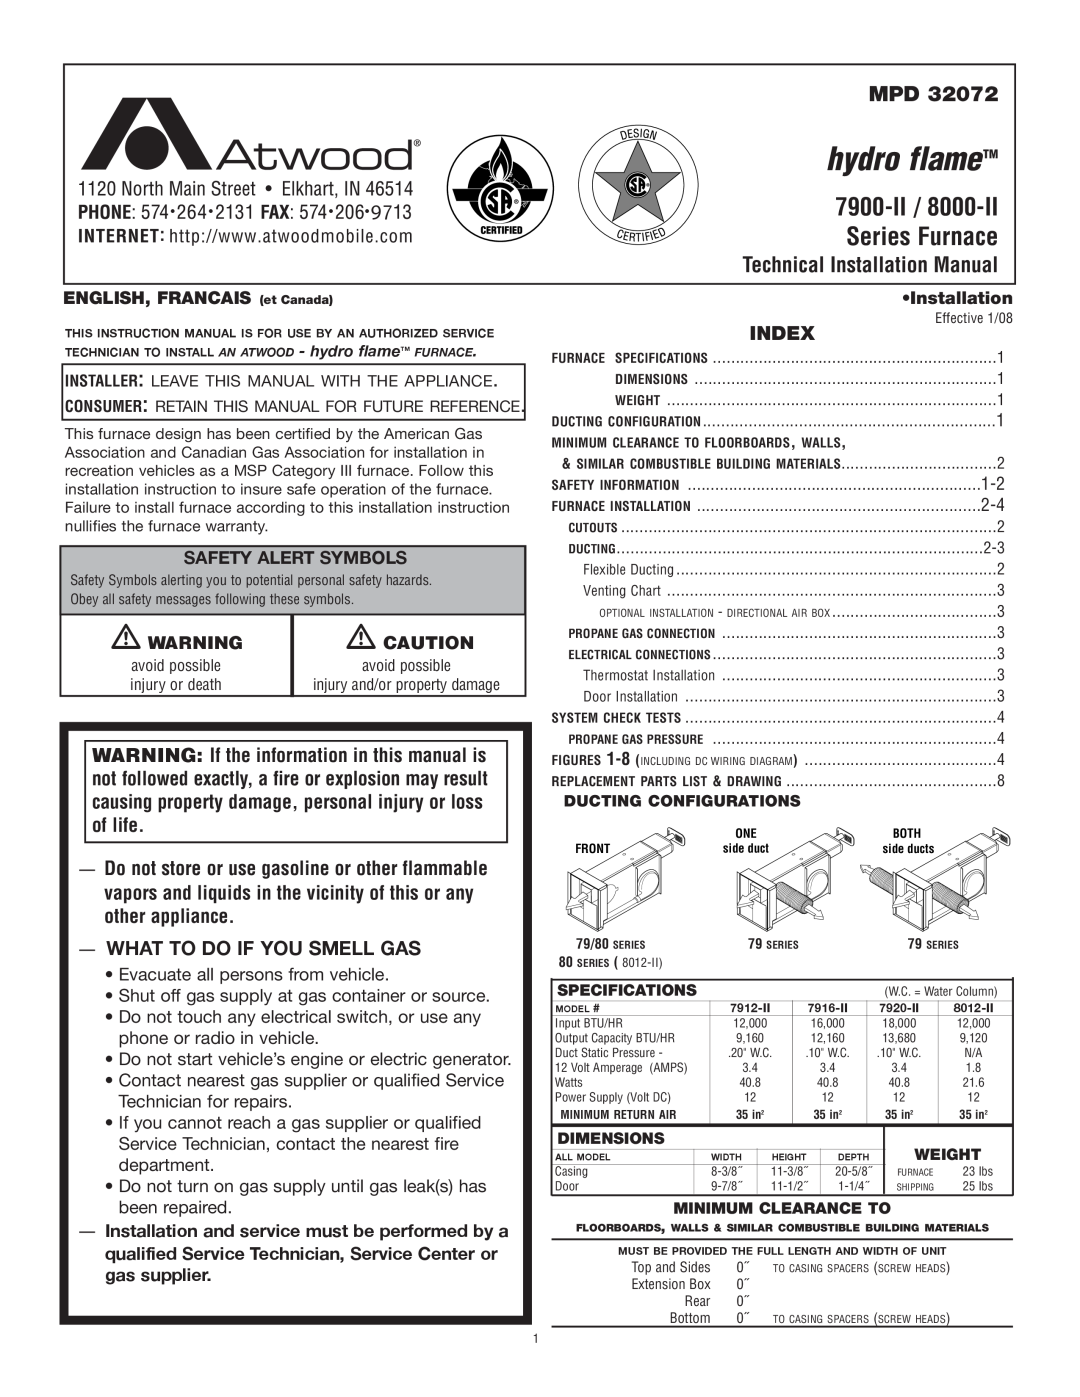 Atwood Mobile Products 8012-II, 7916-II installation manual What To Do If You Smell Gas, Index, hydro flameTM, 7900-II 